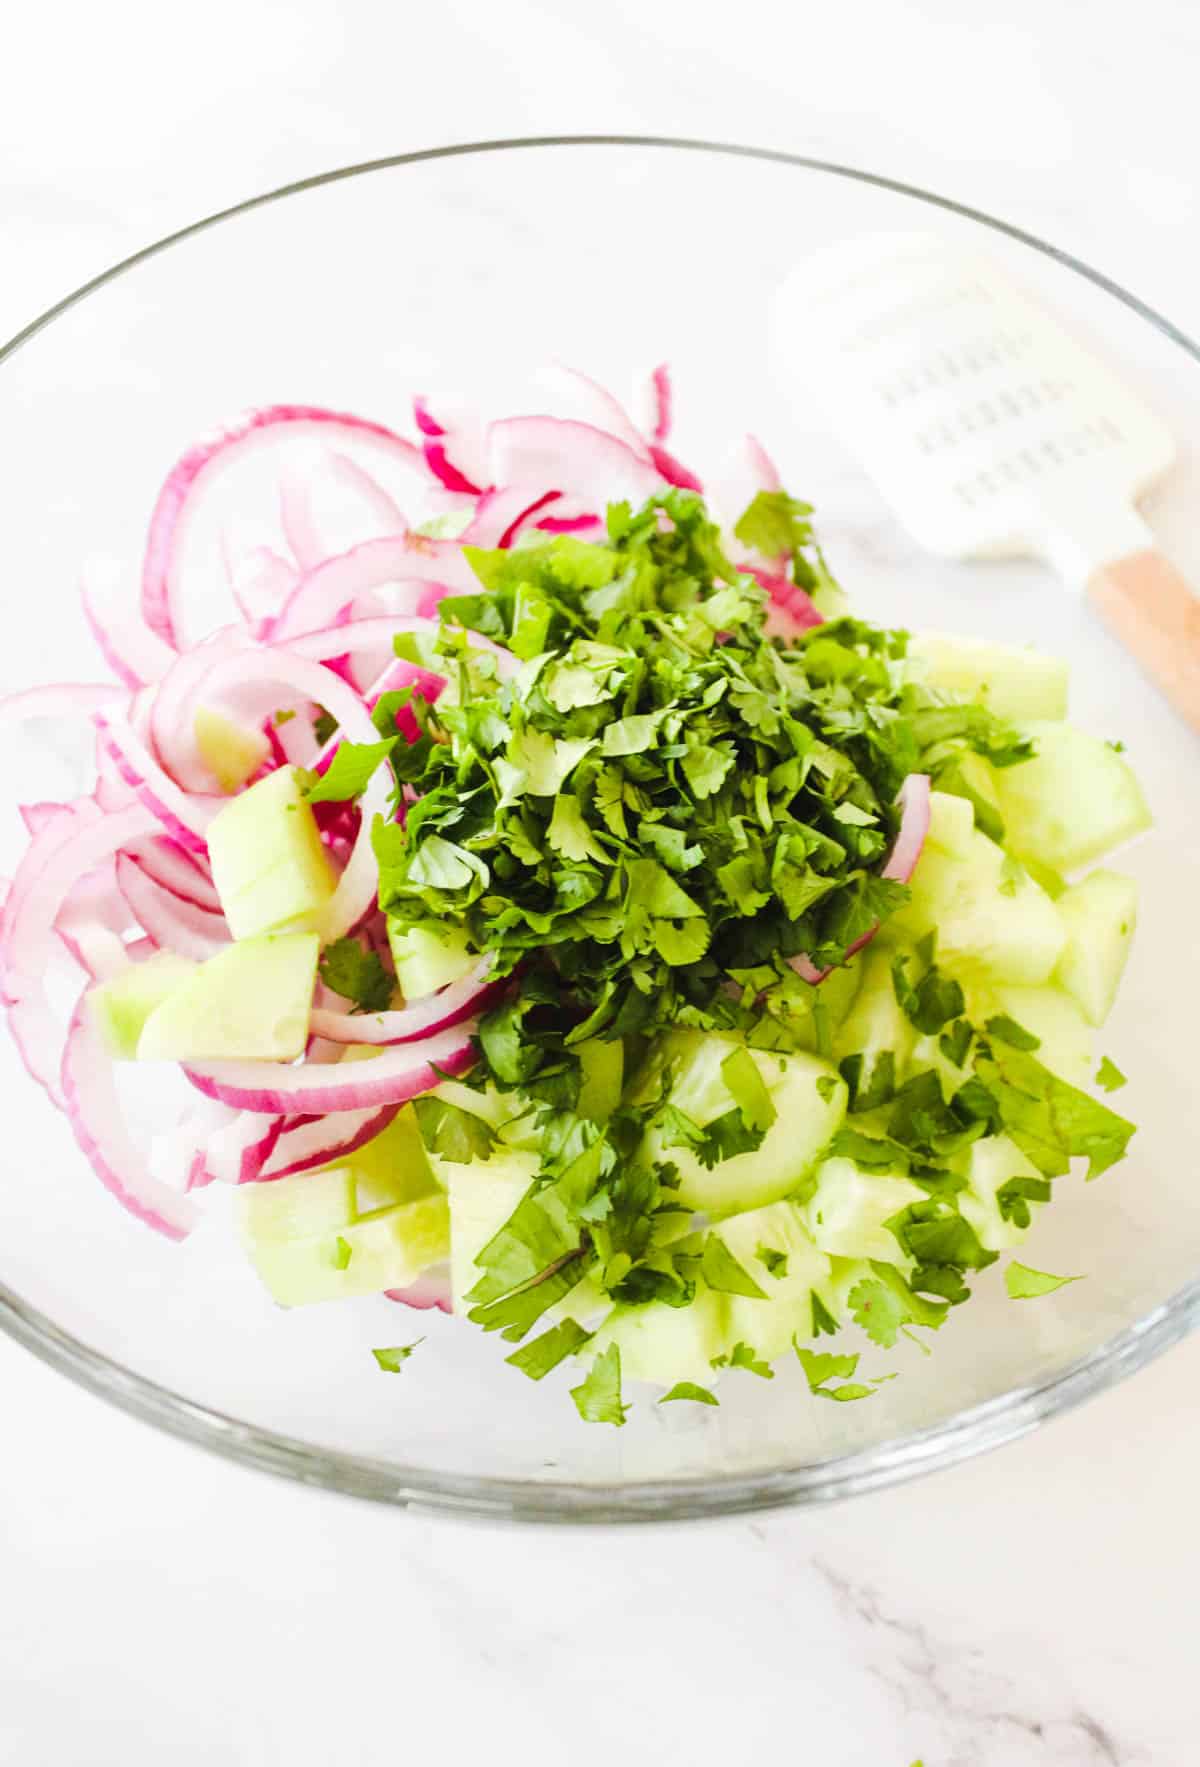 Chopped cucumbers, cilantro, and red onion on a glass bowl.